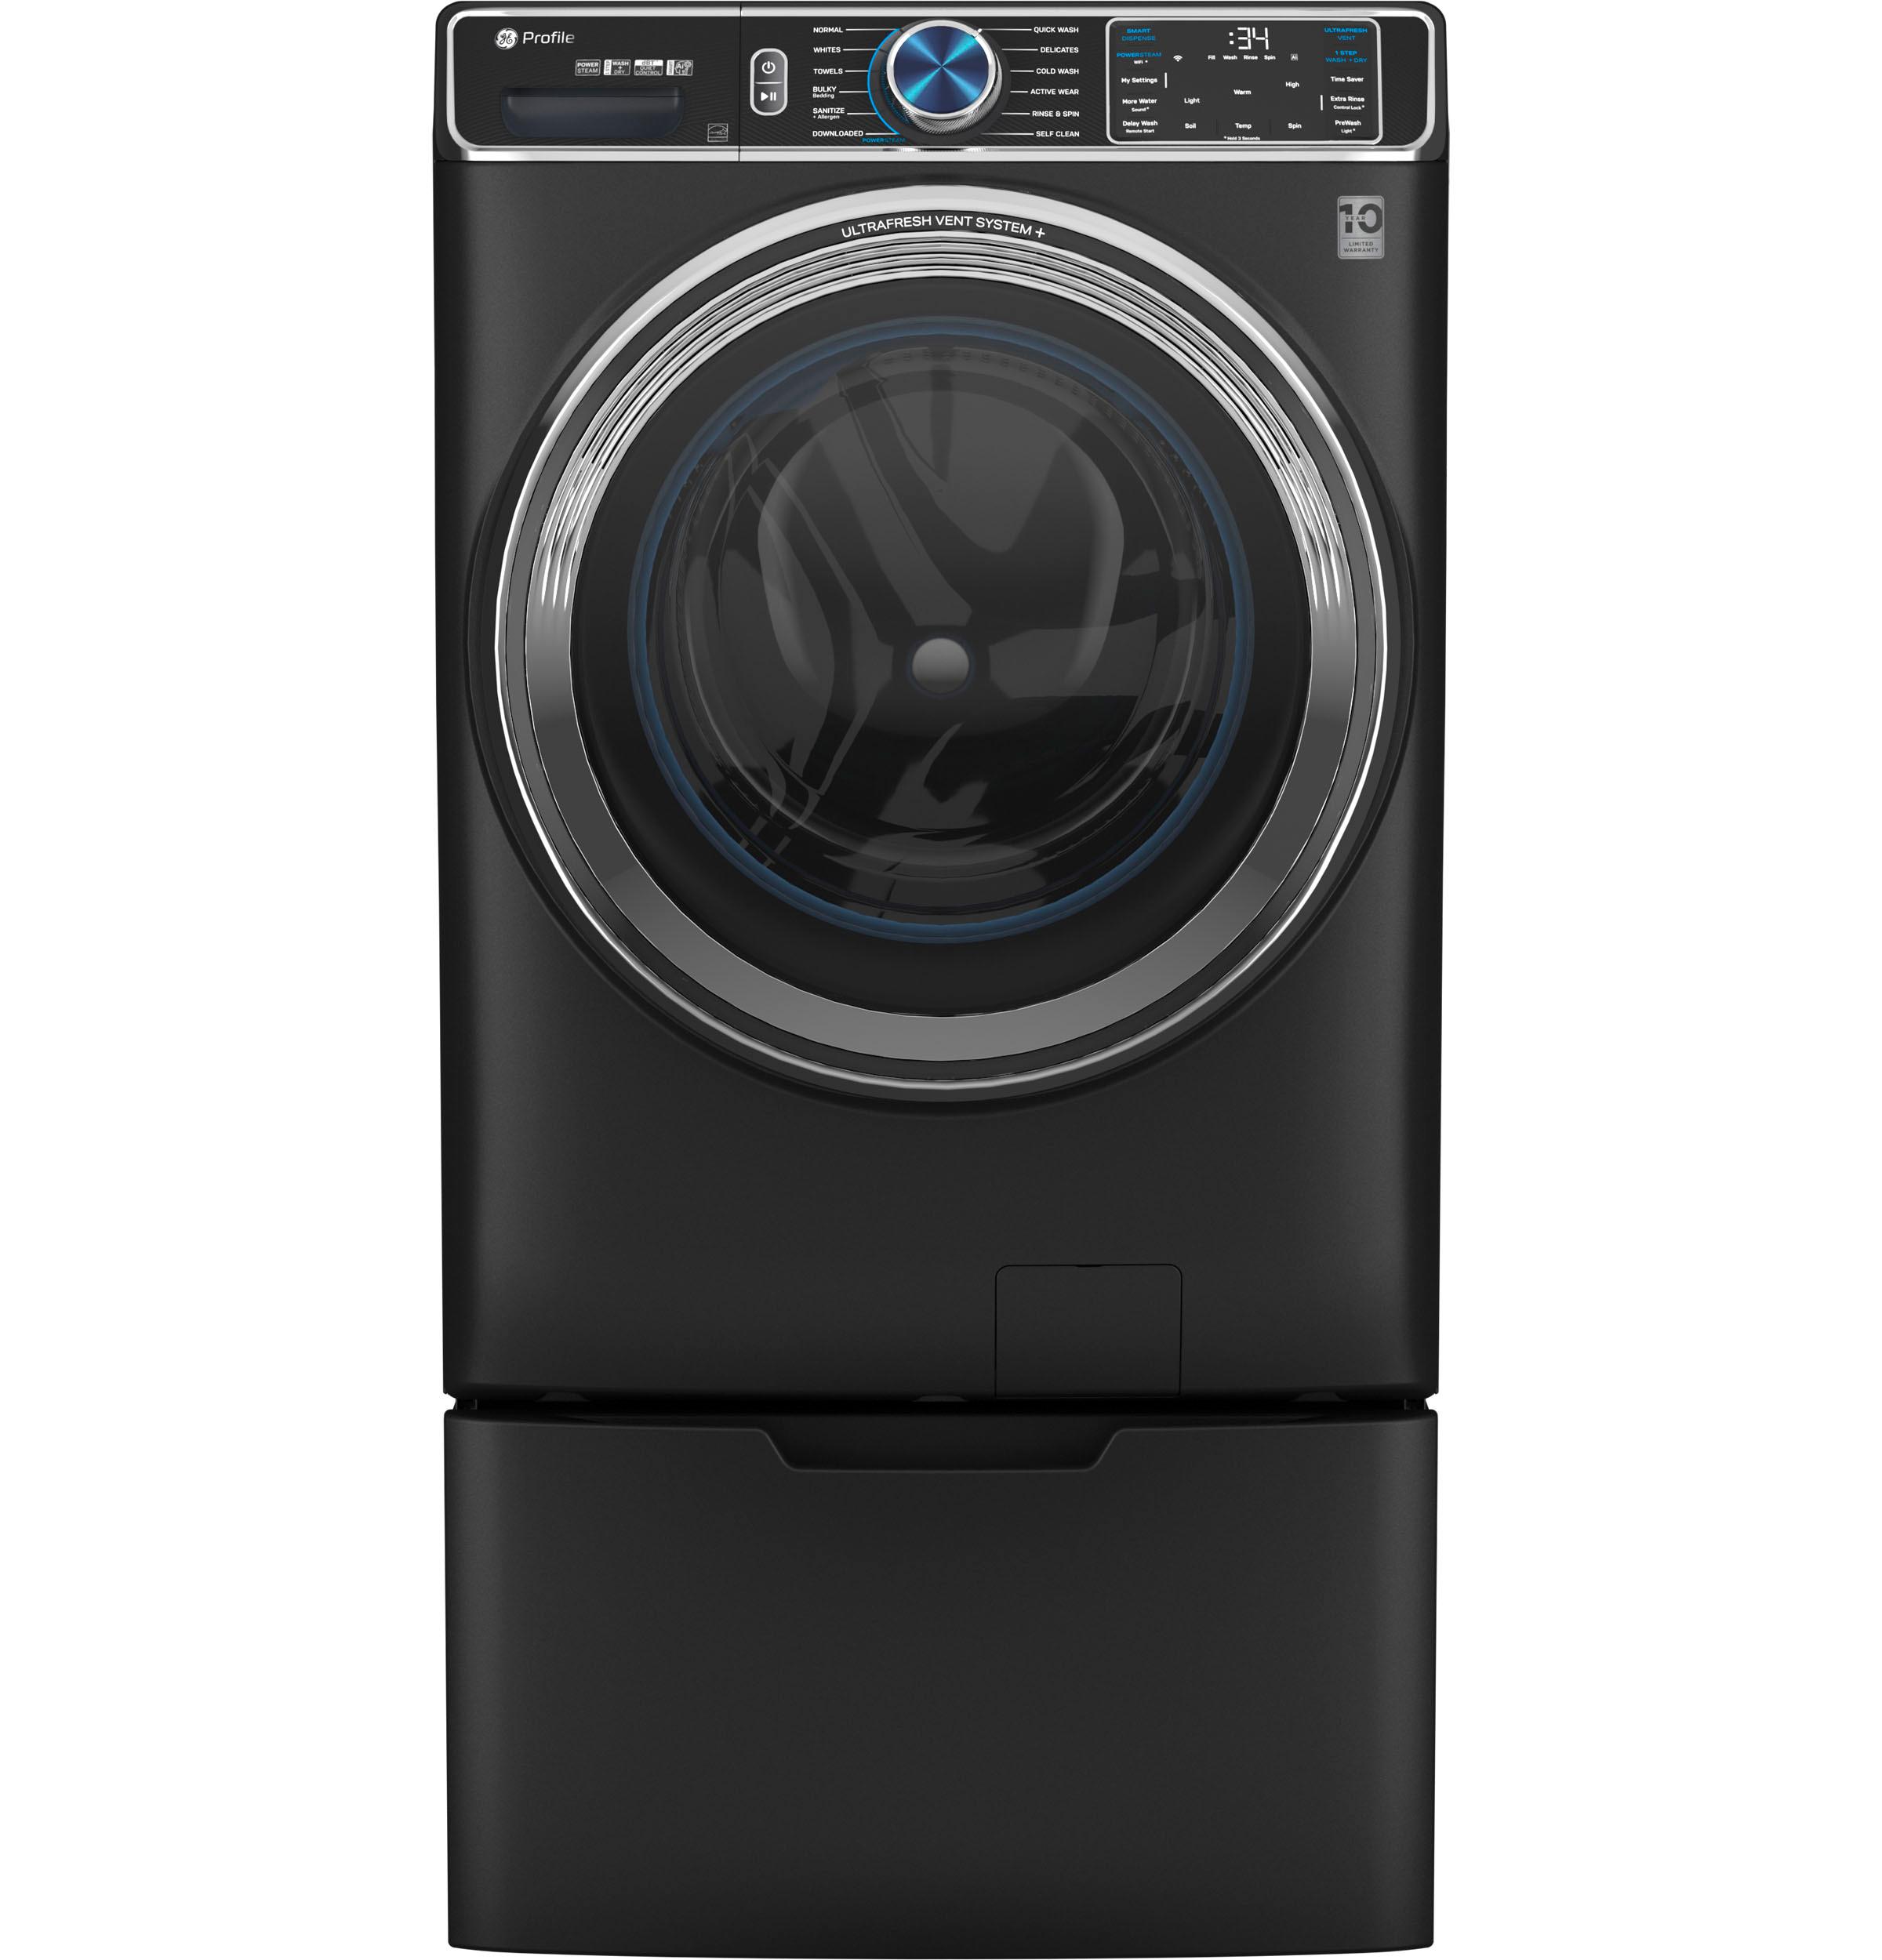 GE Profile™ 5.3 cu. ft. Capacity Smart Front Load ENERGY STAR® Steam Washer with Adaptive SmartDispense™ UltraFresh Vent System Plus™ with OdorBlock™